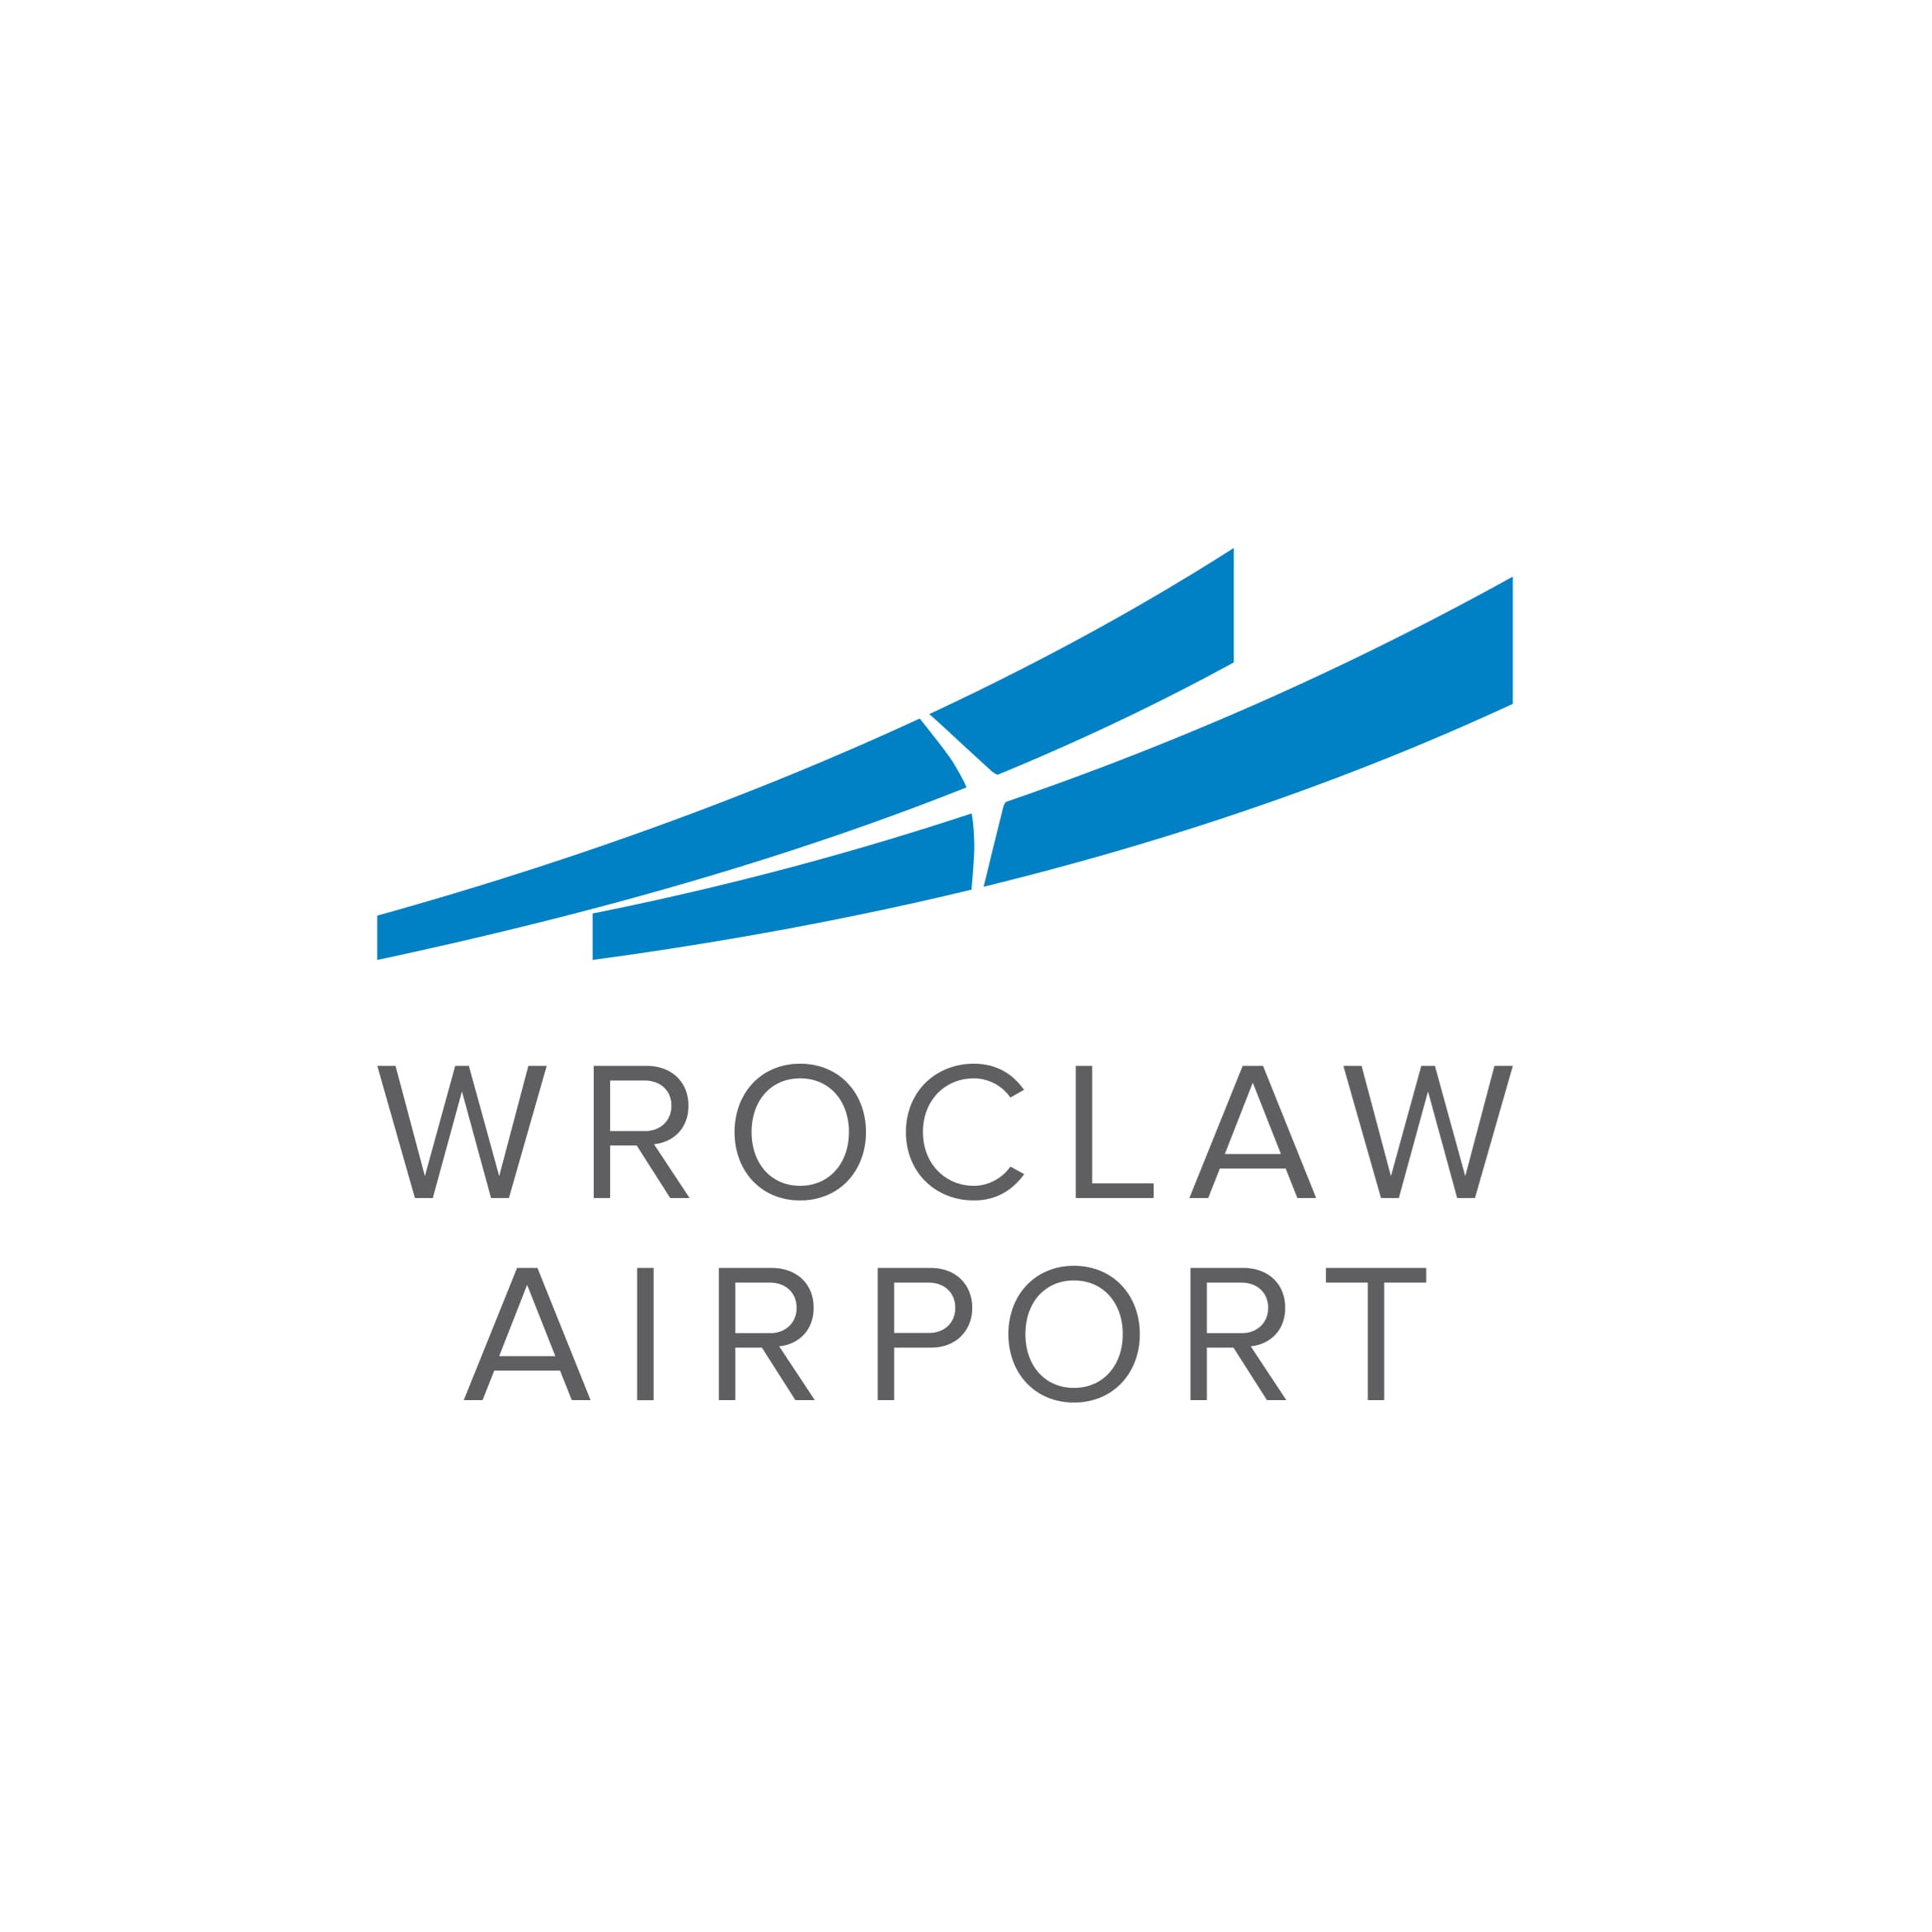 Wroclaw Airport